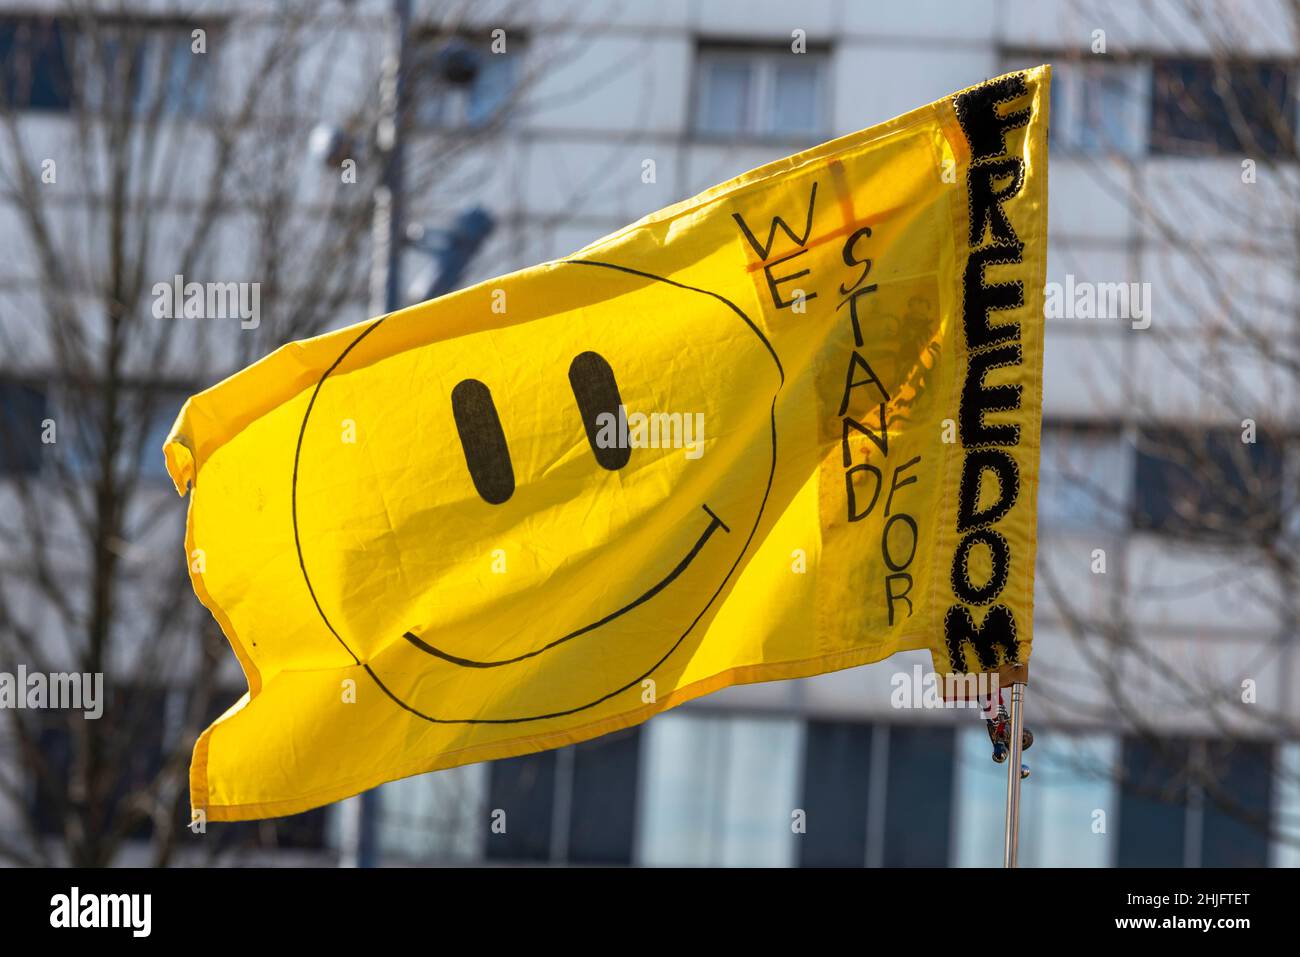 Flag at a English Constitution Party Freedom Rally promoting Graham Moore for the Southend West by-election 2022. Iconic yellow smiley face symbol Stock Photo